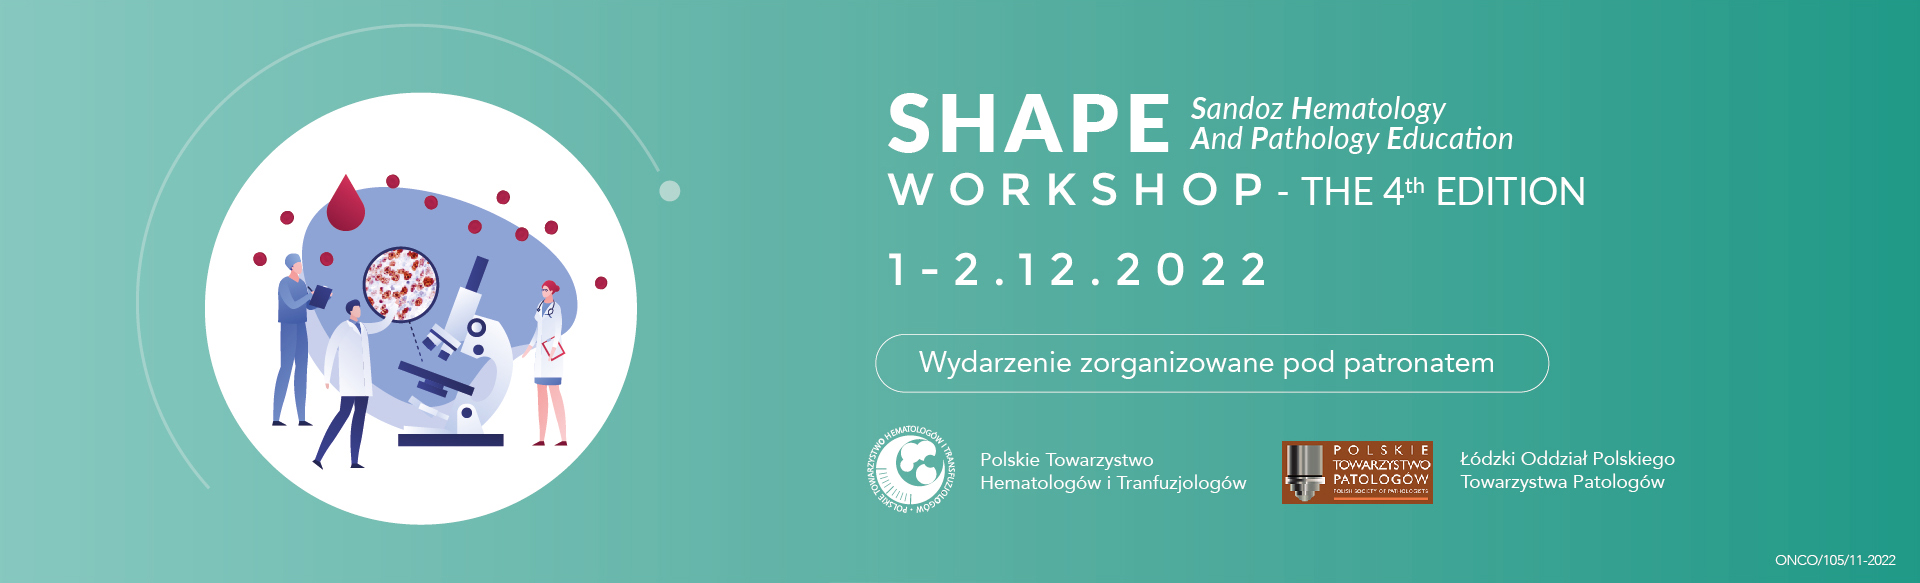 SHAPE workshop - the 4th edition